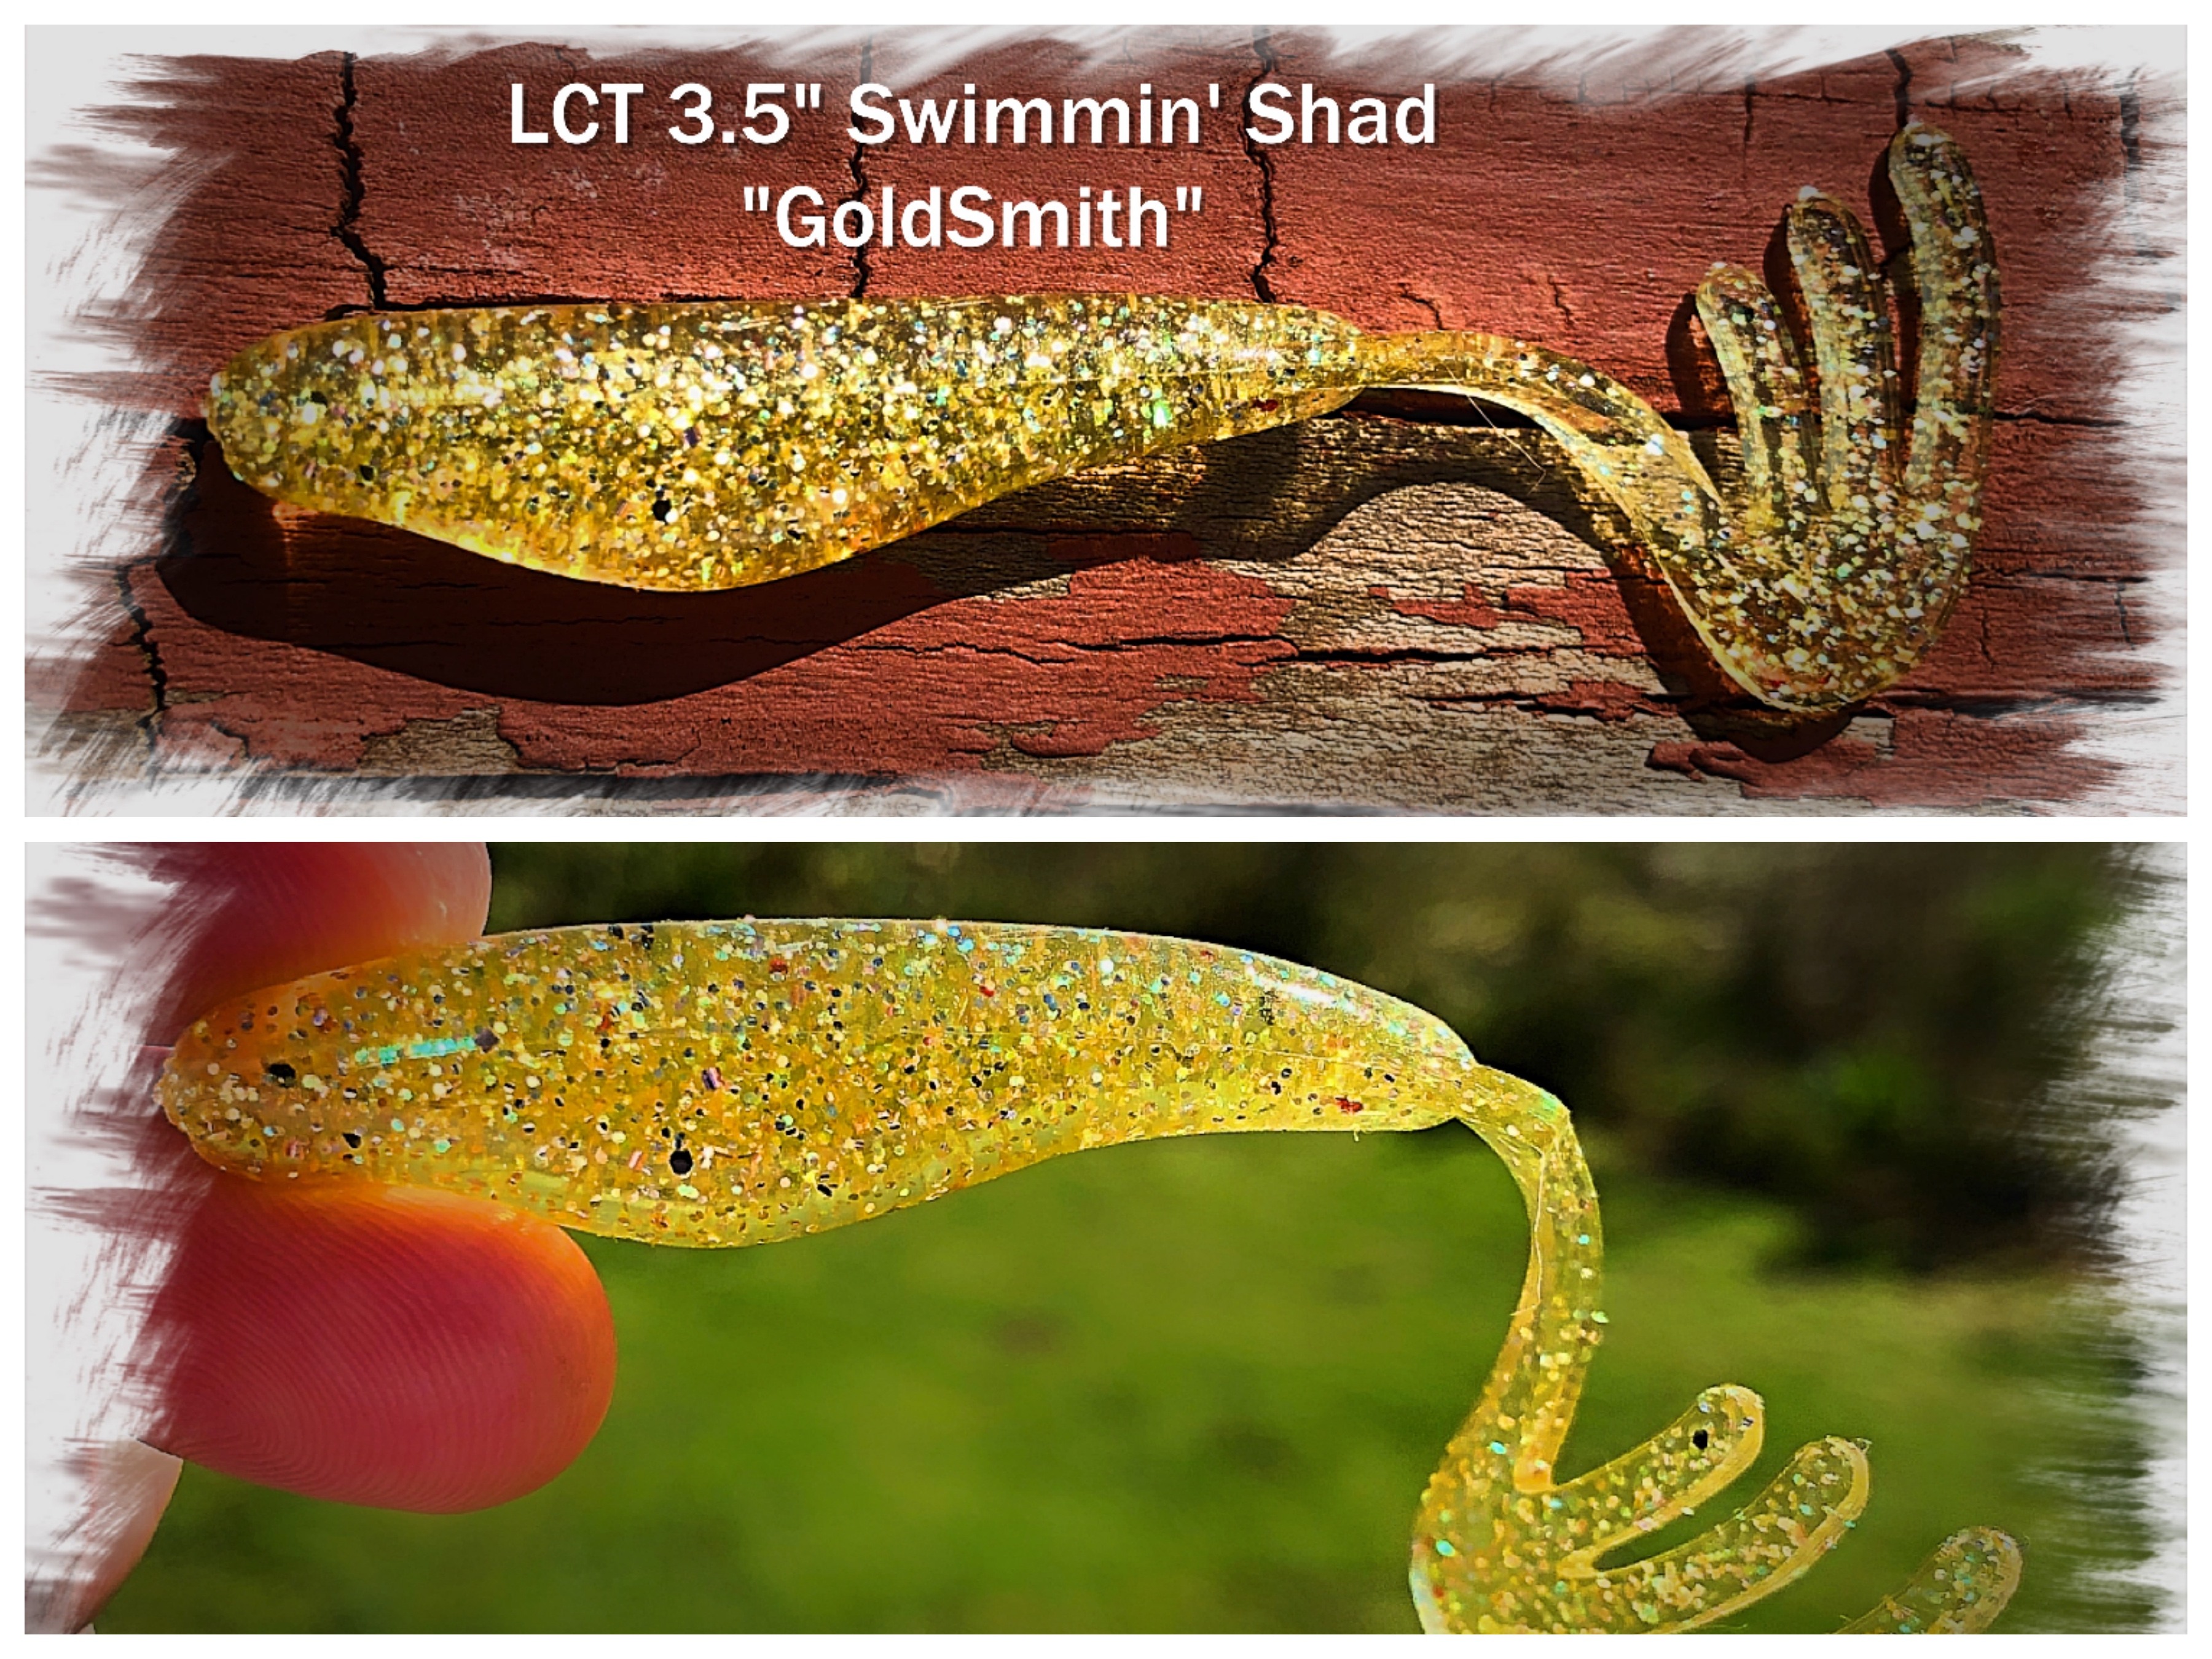 LCT 3.25″ Geaux Shrimp (5 Pack) Marsh Minnow – Legacy Custom Tackle